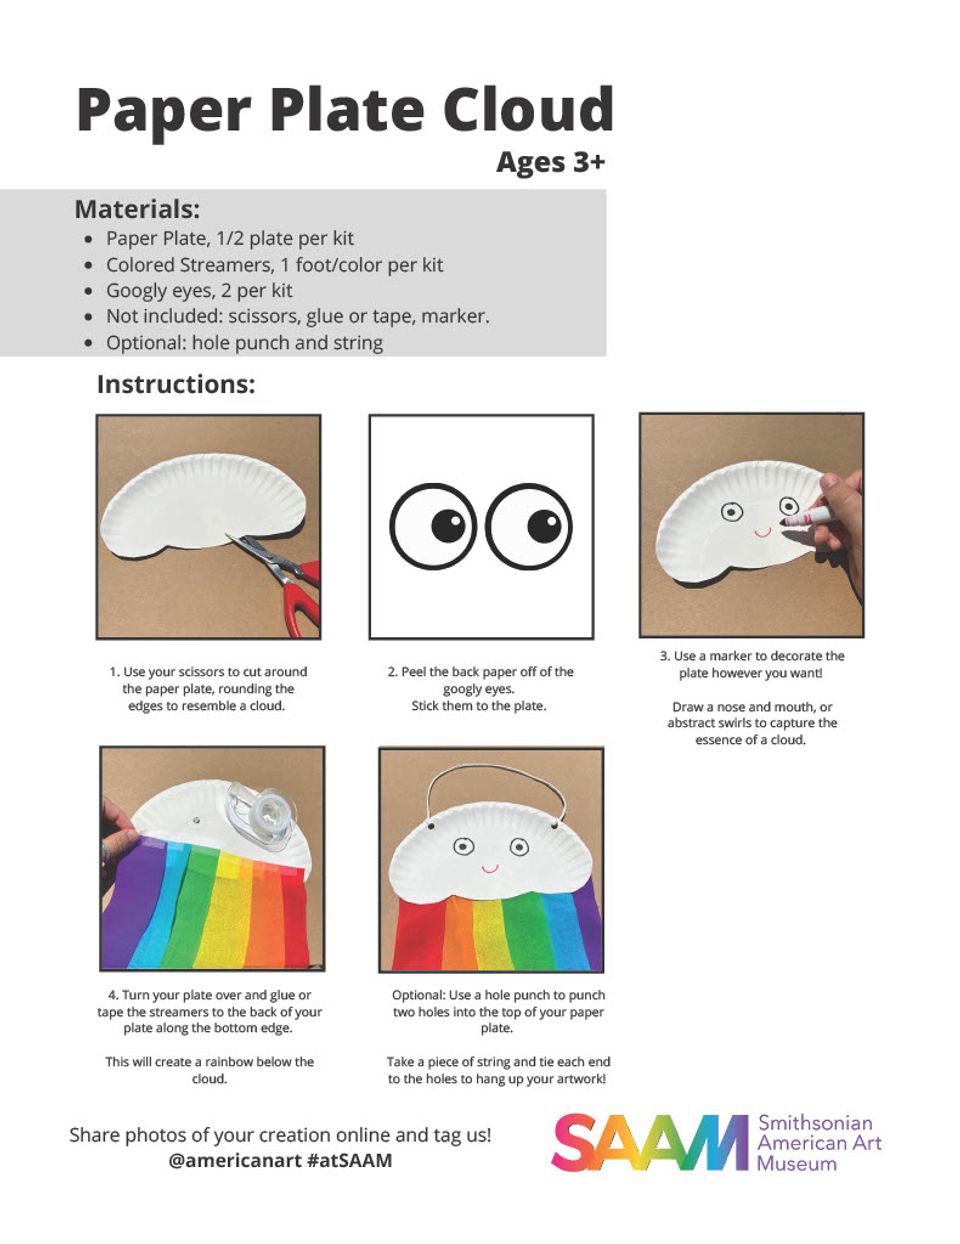 A colorful PDF showing how to make a paper plate cloud